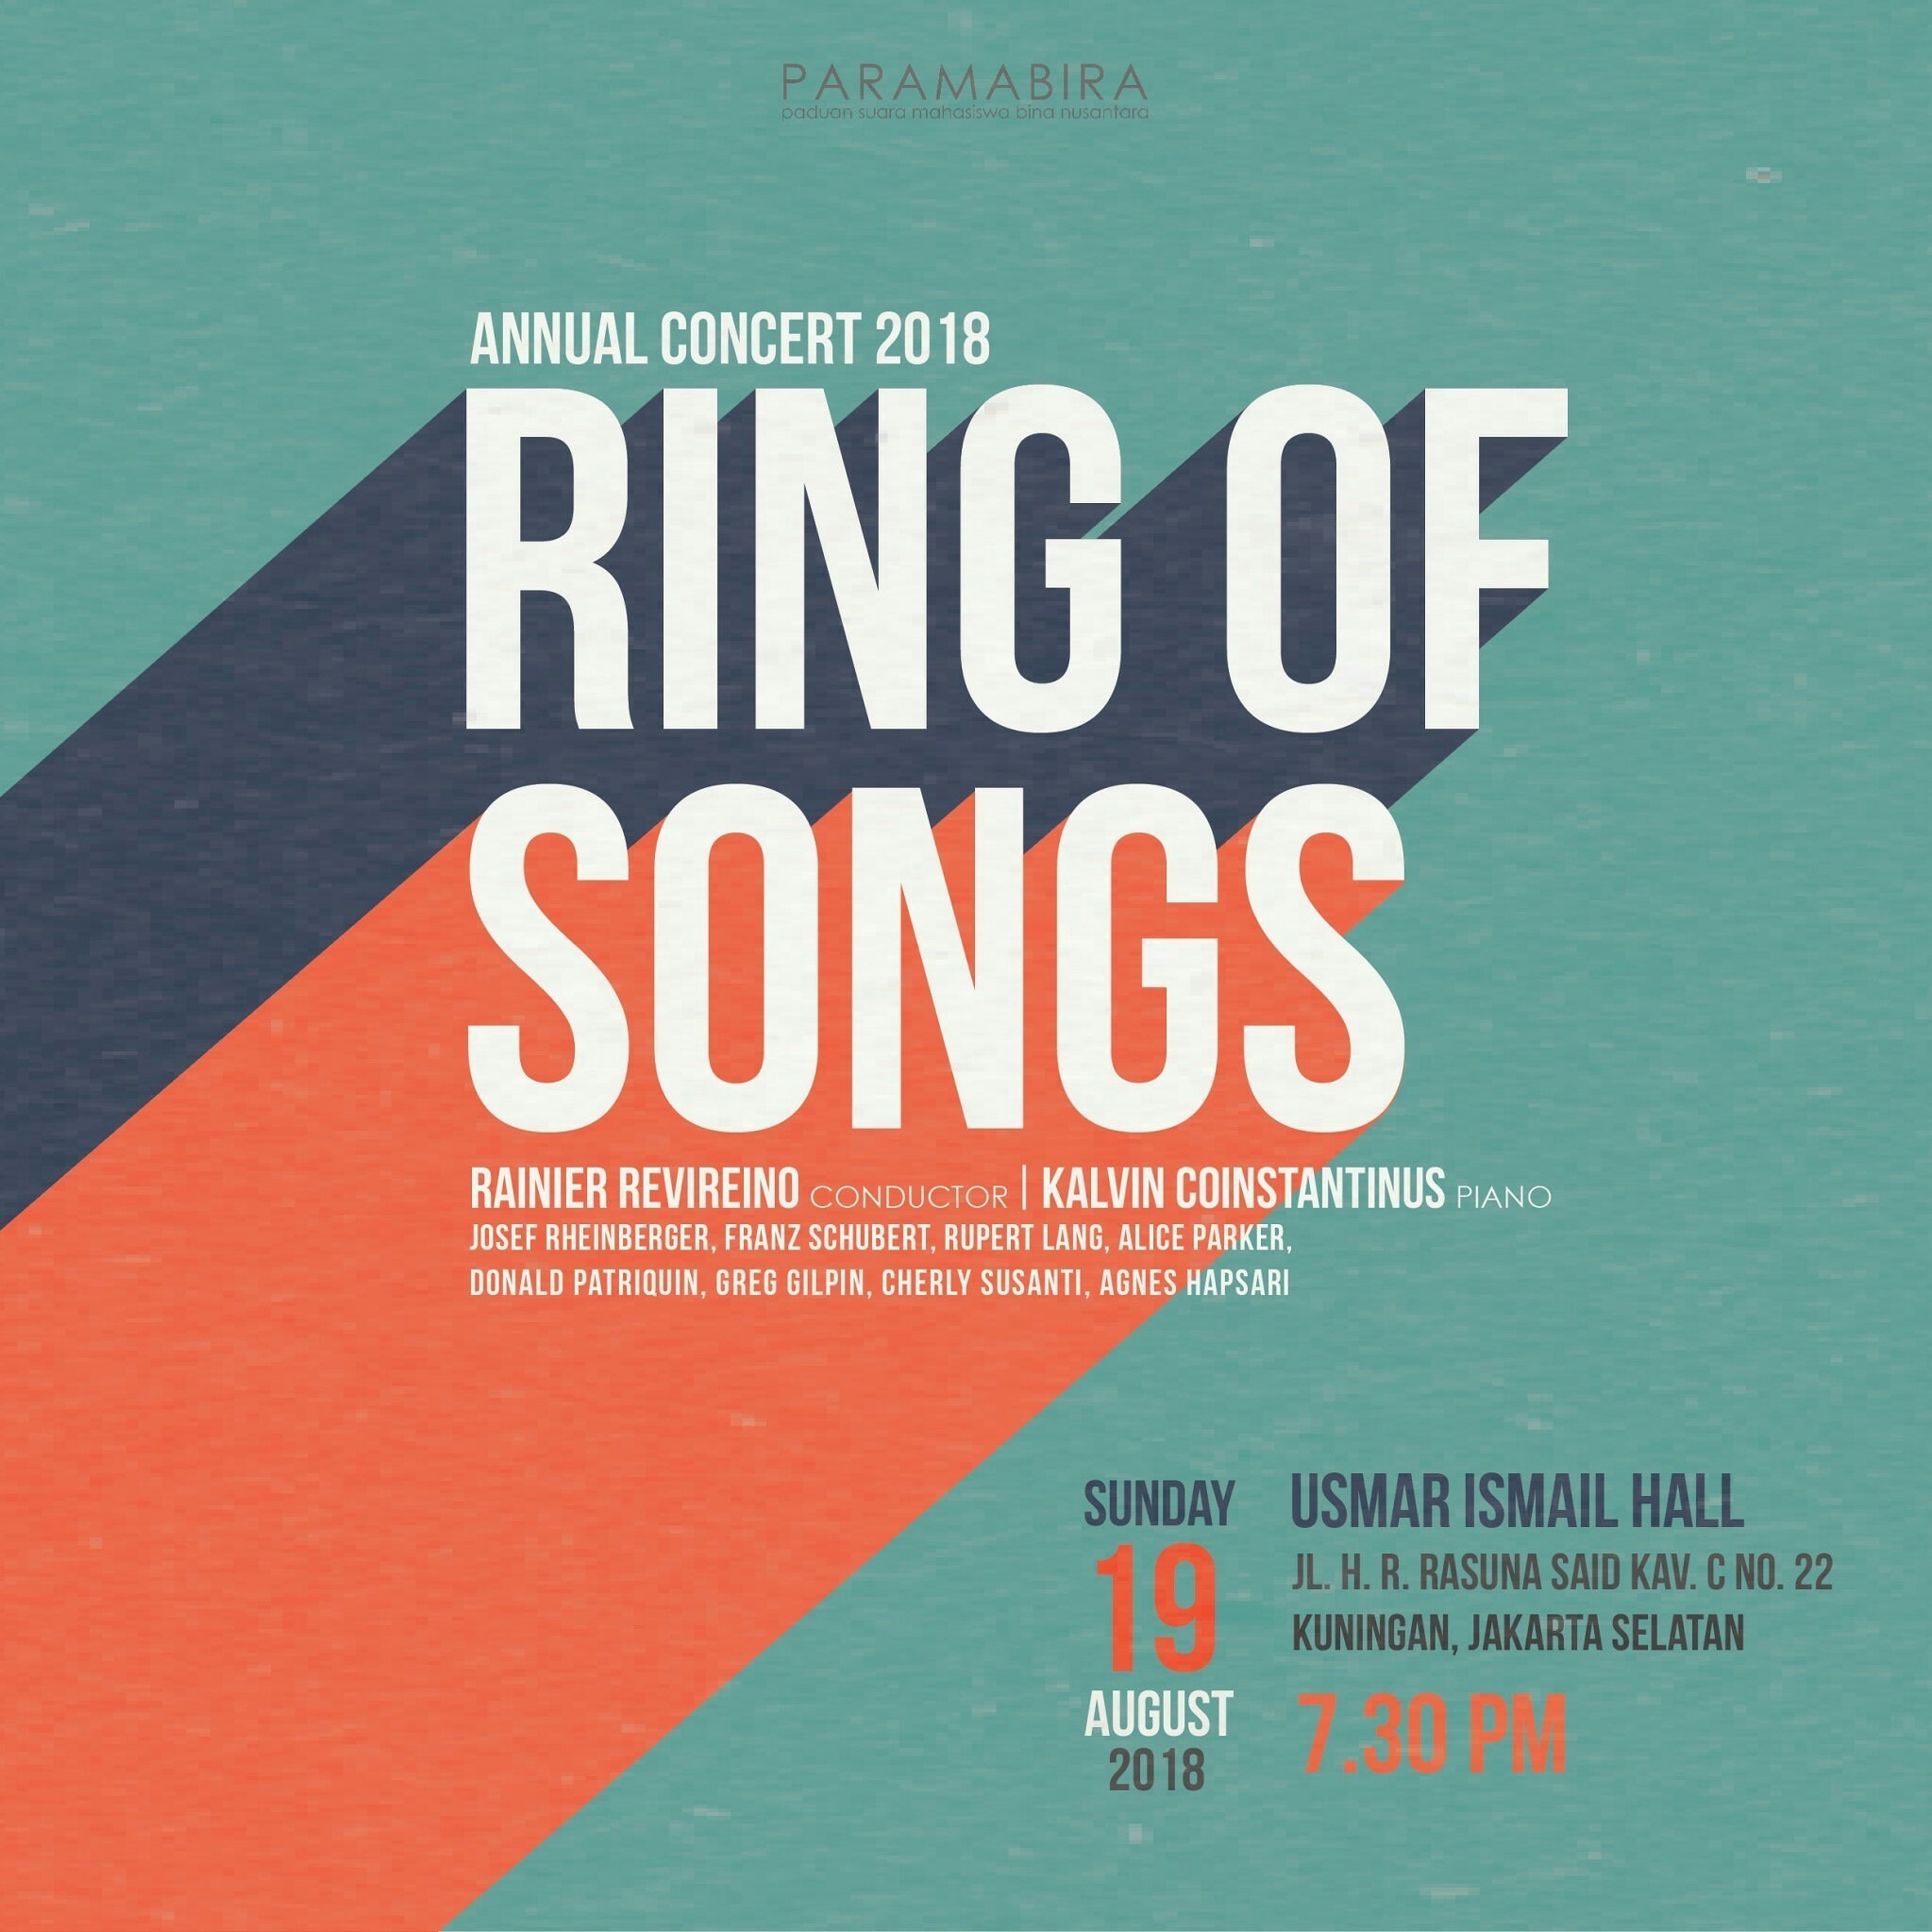 Annual Concert 2018 "Ring of Songs"